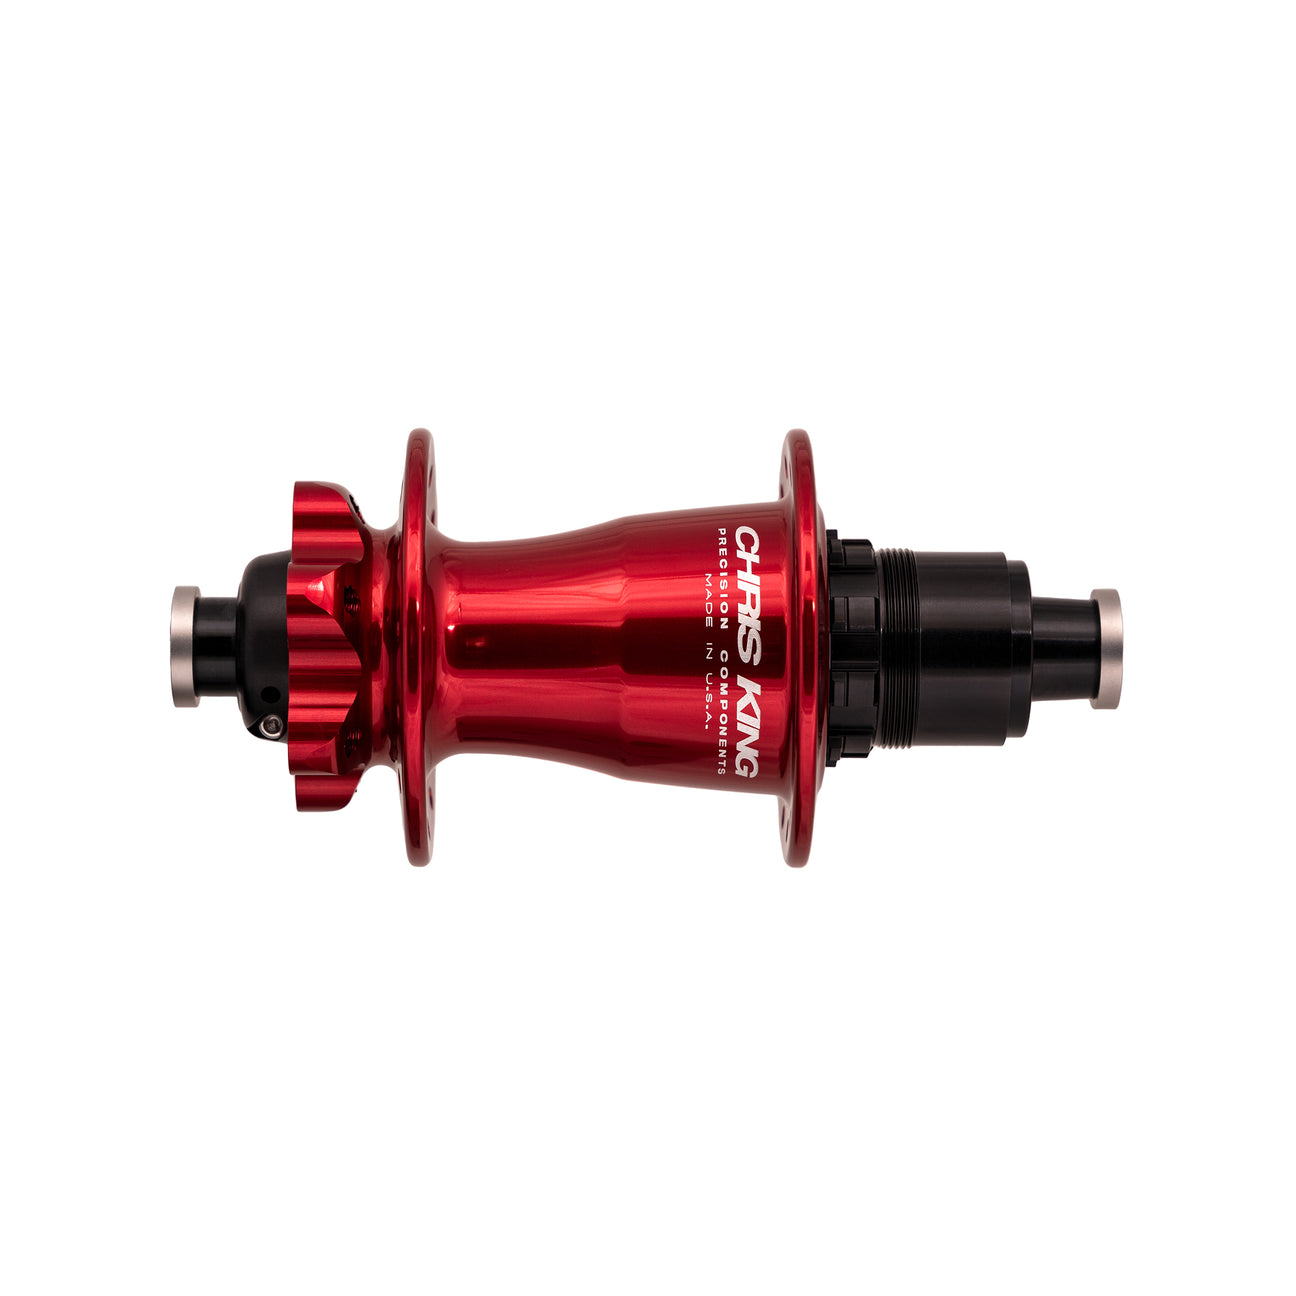 Chris King boost 6 bolt rear in red